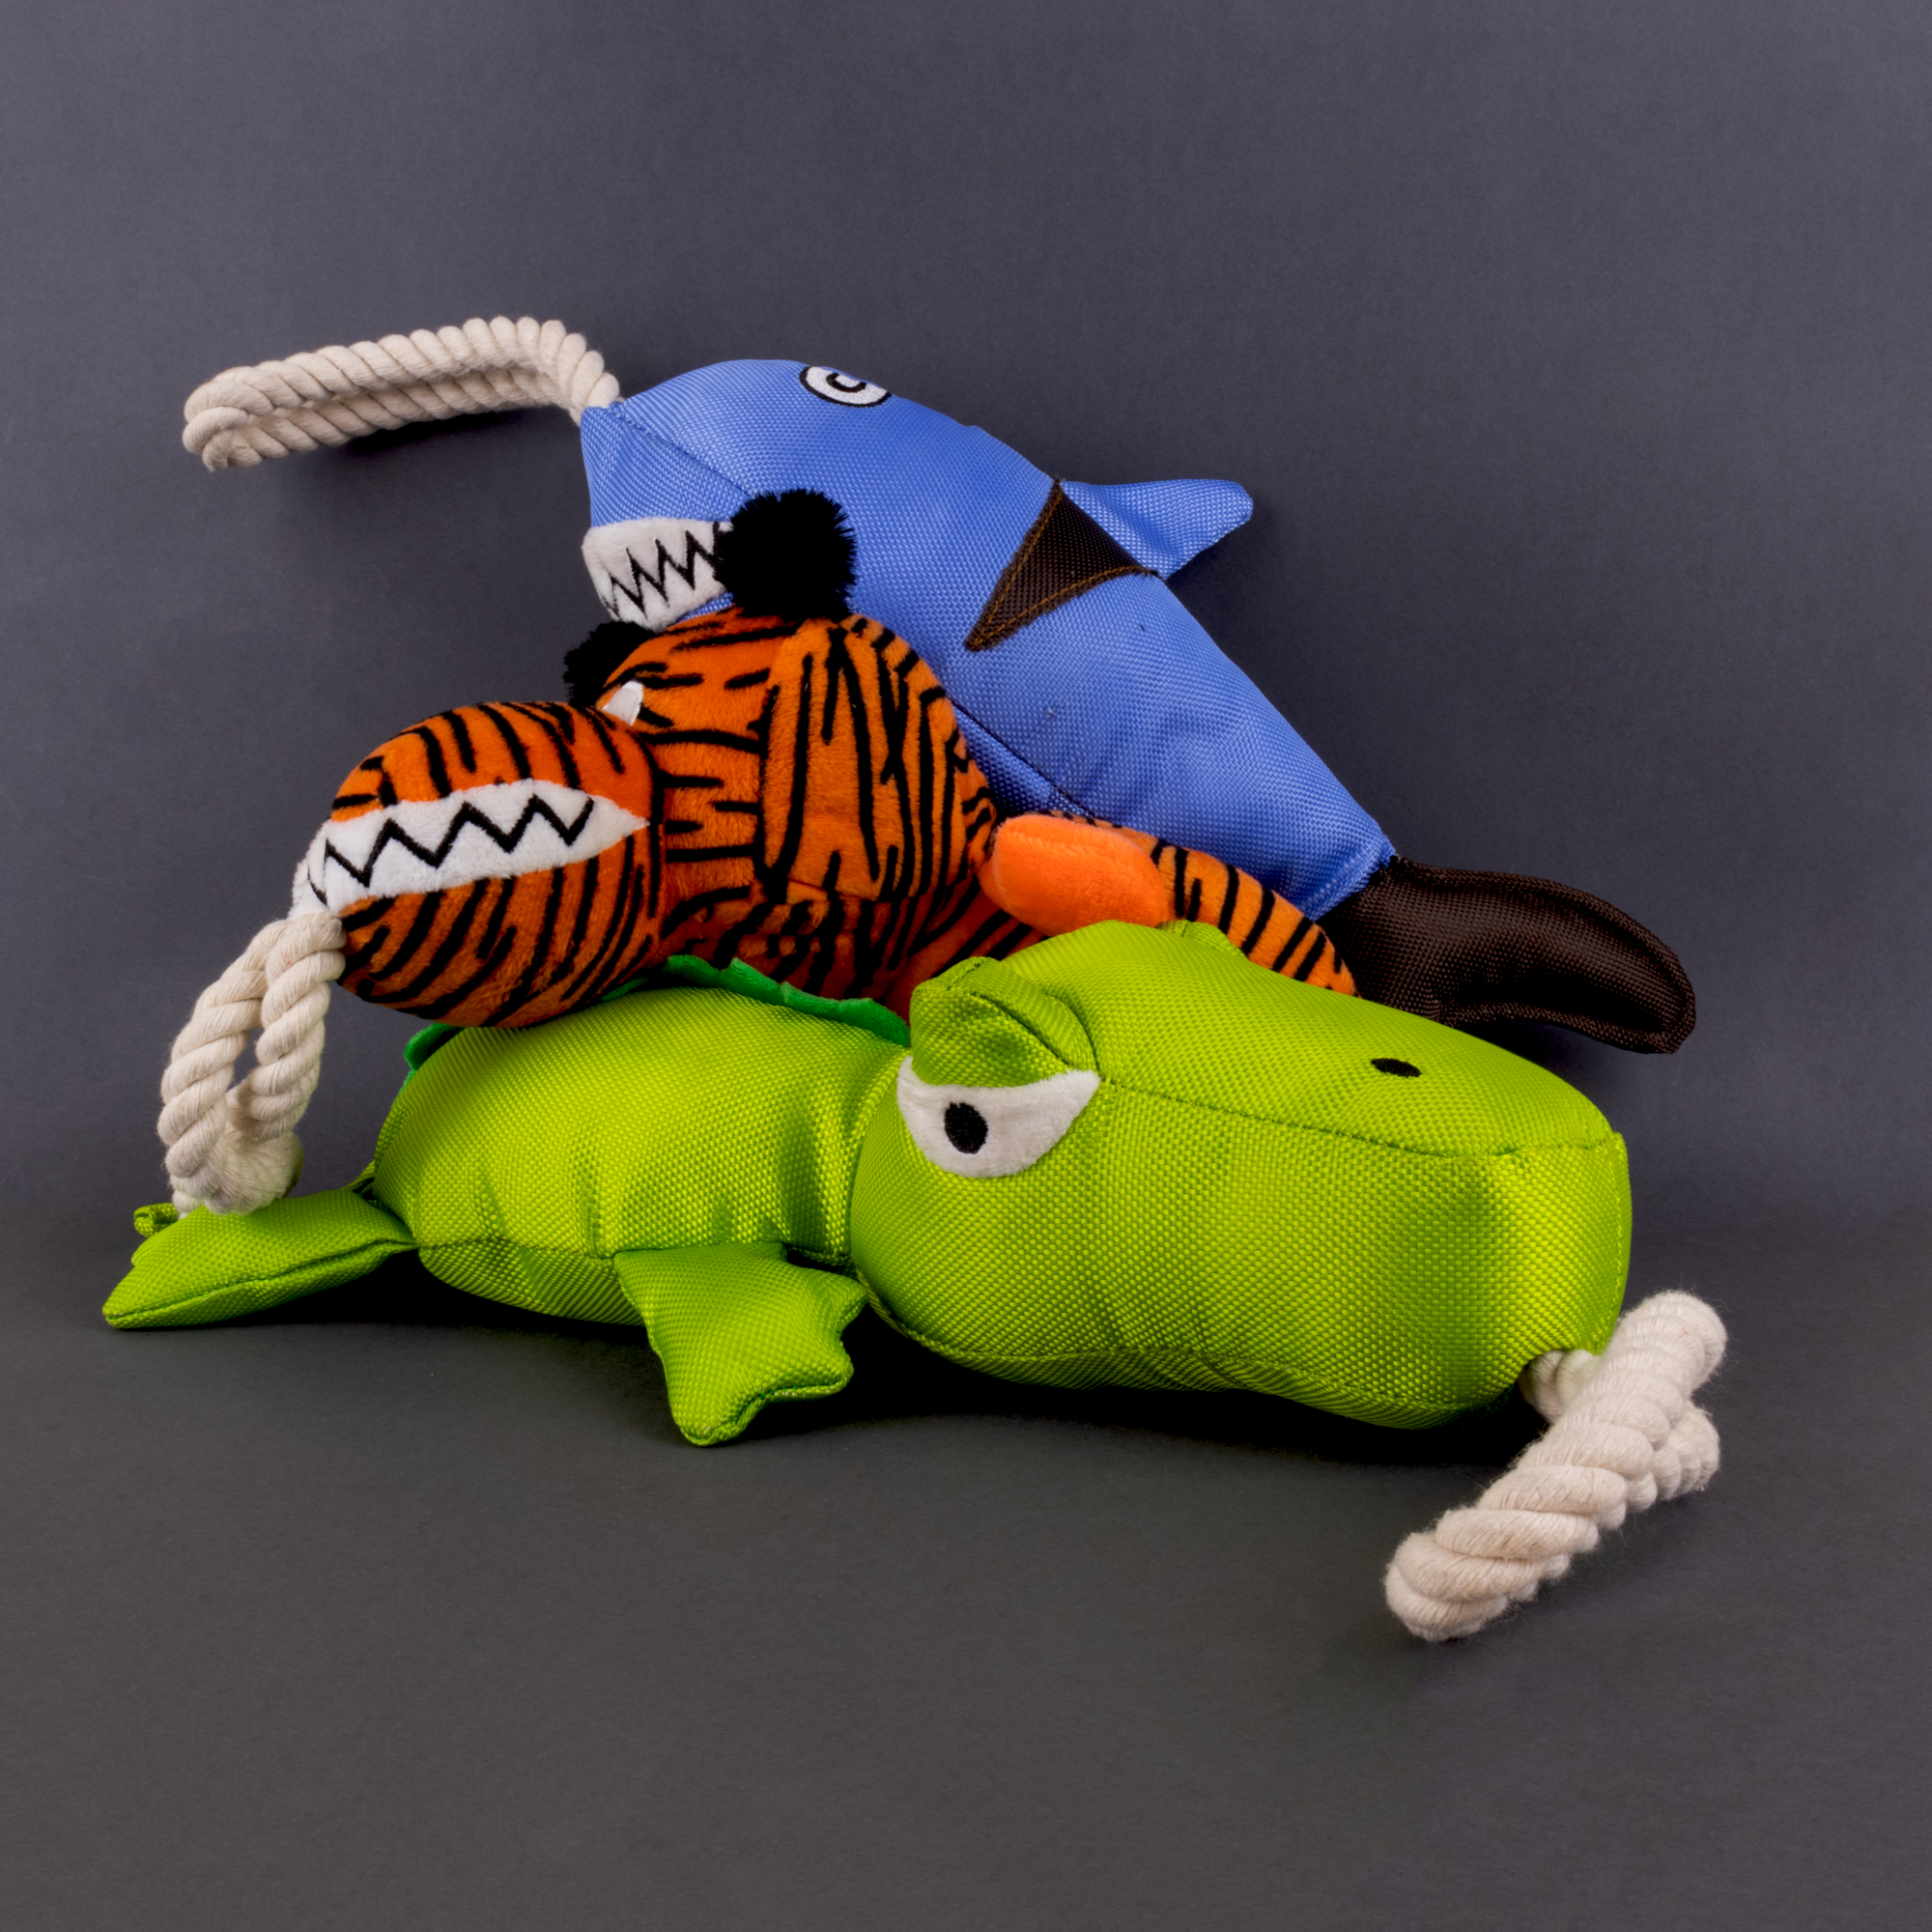 Roaring Fun: Tiger Rope Plush Toy with Squeaker